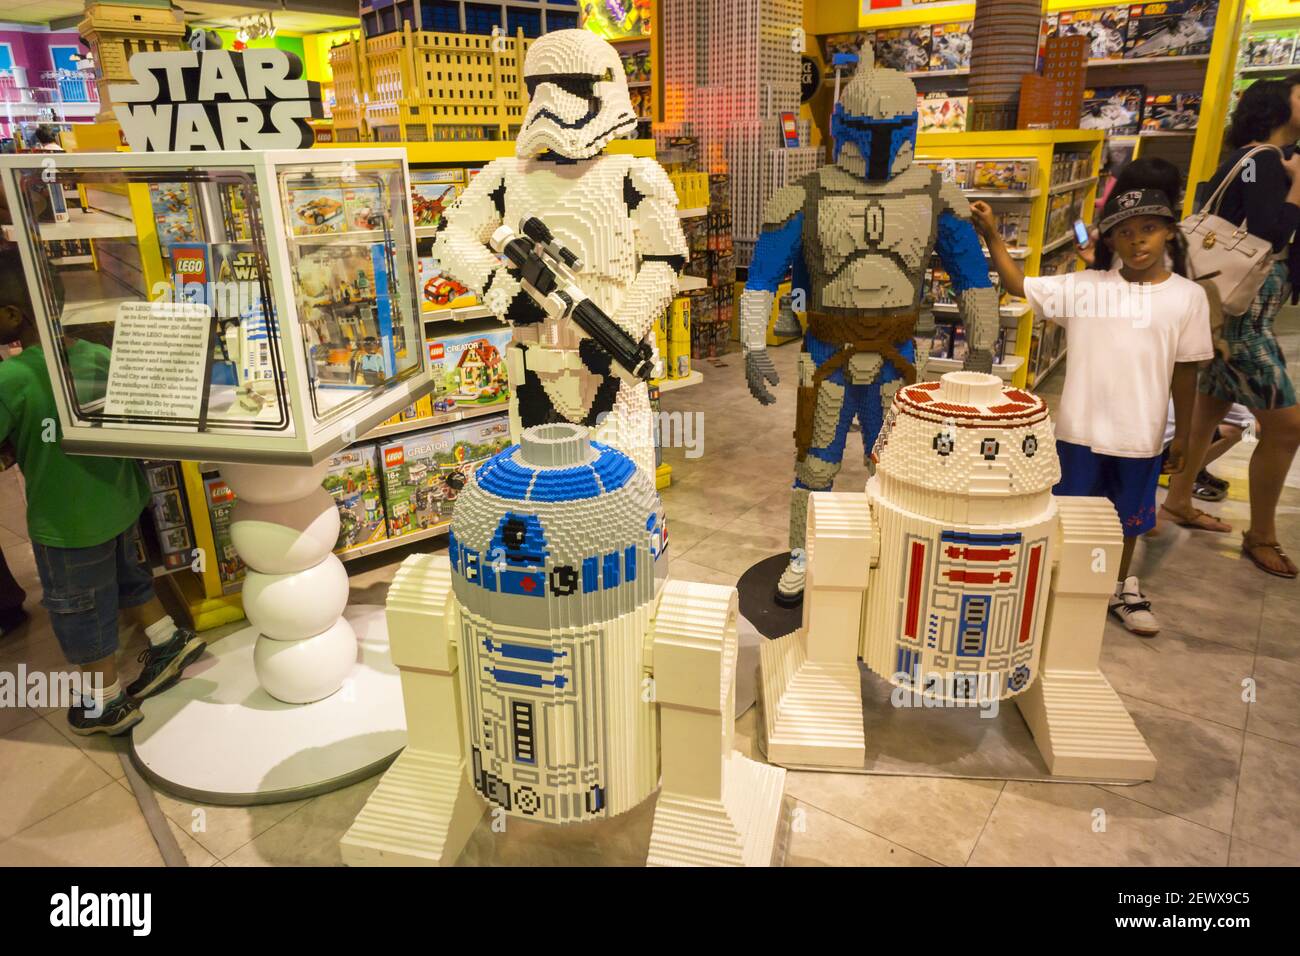 Lego Star Wars display in the Toys R Us store in Times Square in New York  on so-called "Force Friday", September 4, 2015. Lego announced it will lay  off 8 percent of